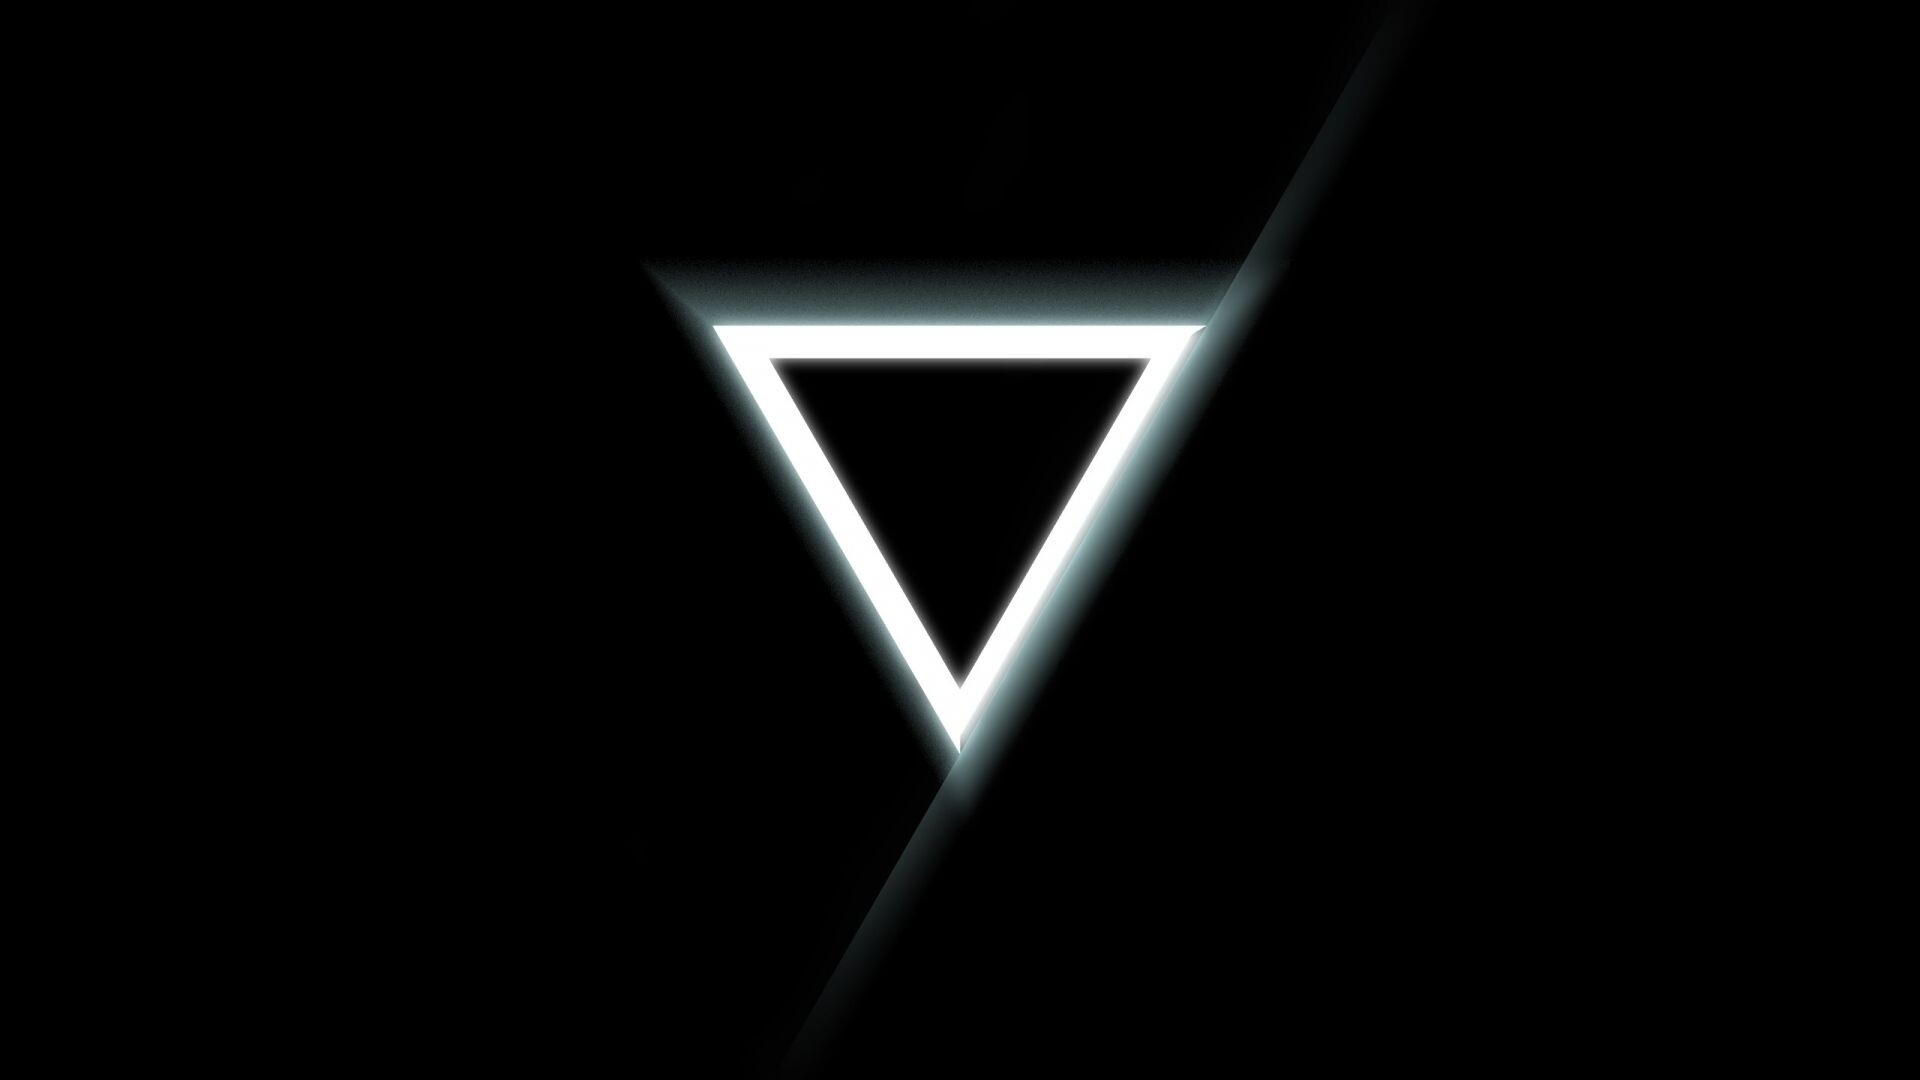 Triangle: Black and white, Two-dimensional space, Complete angle. 1920x1080 Full HD Background.